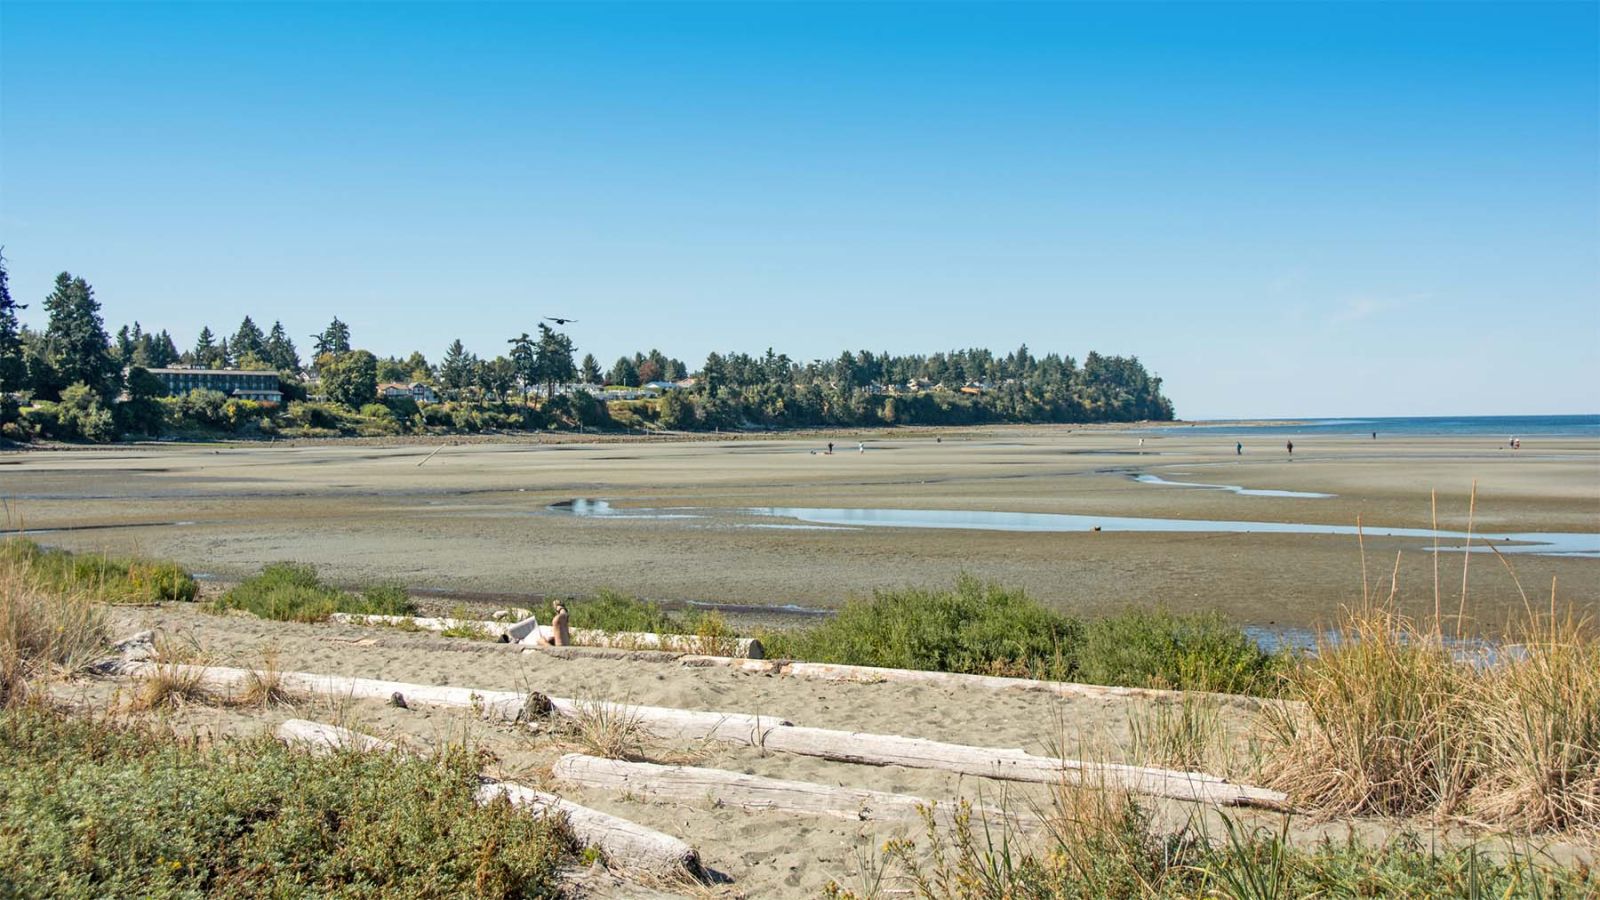 Parksville nature scene with ocean and beach